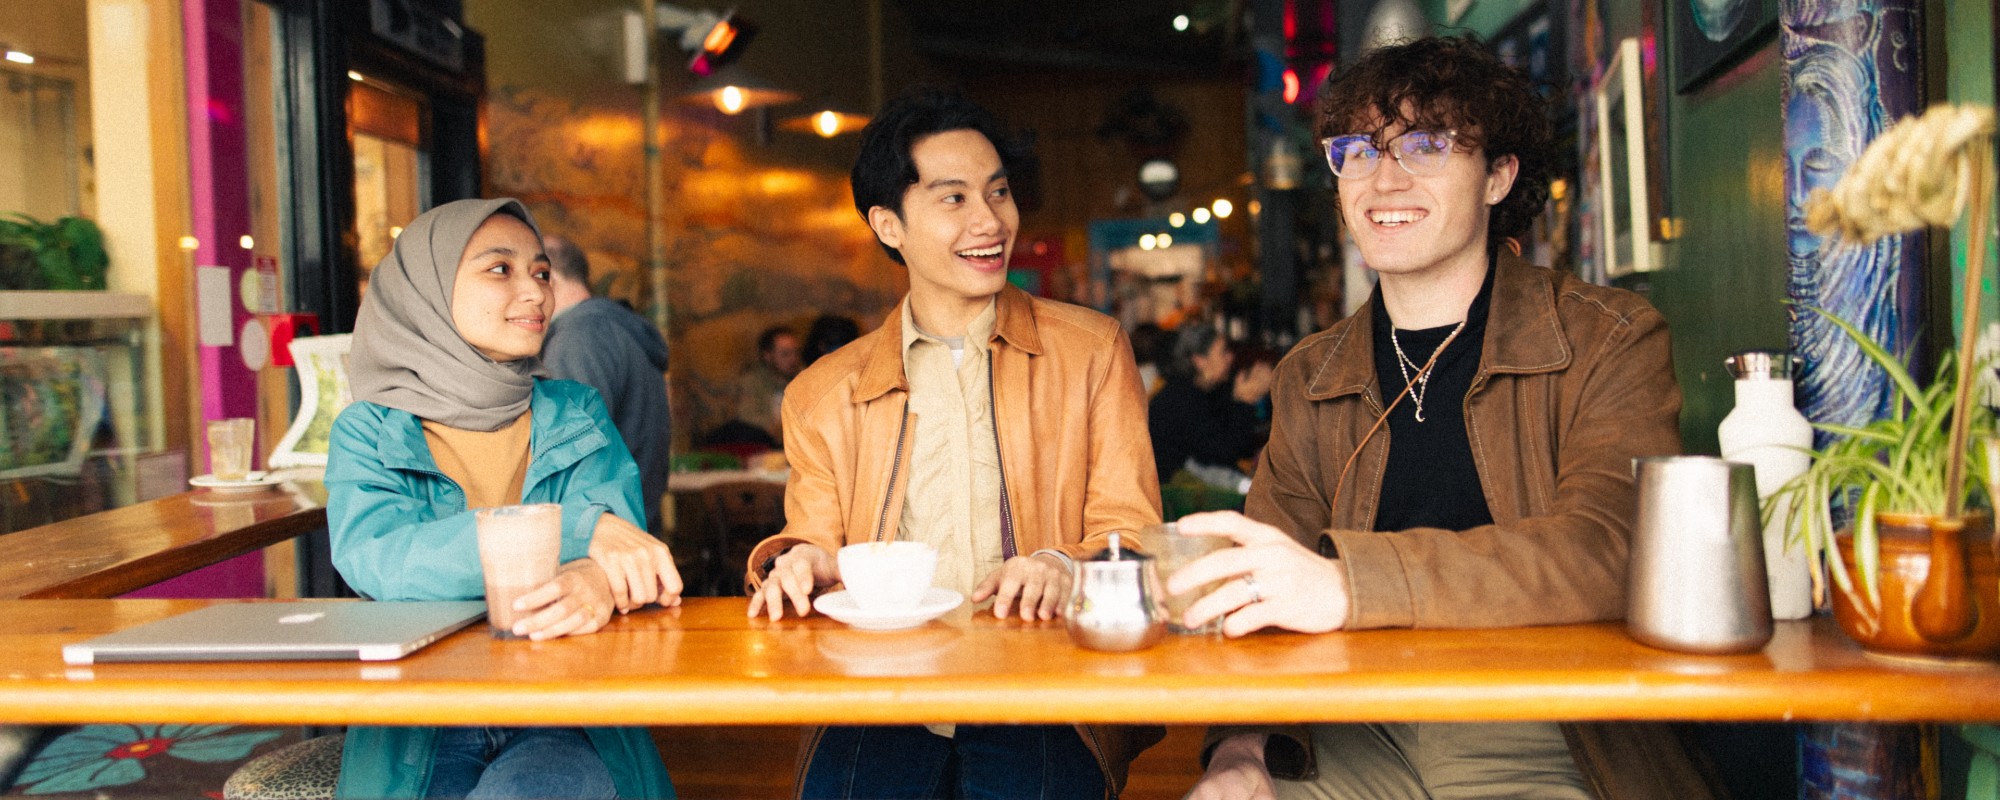 Three students sit by a table in a cafe, drinking coffee and engaged in conversation while looking out.